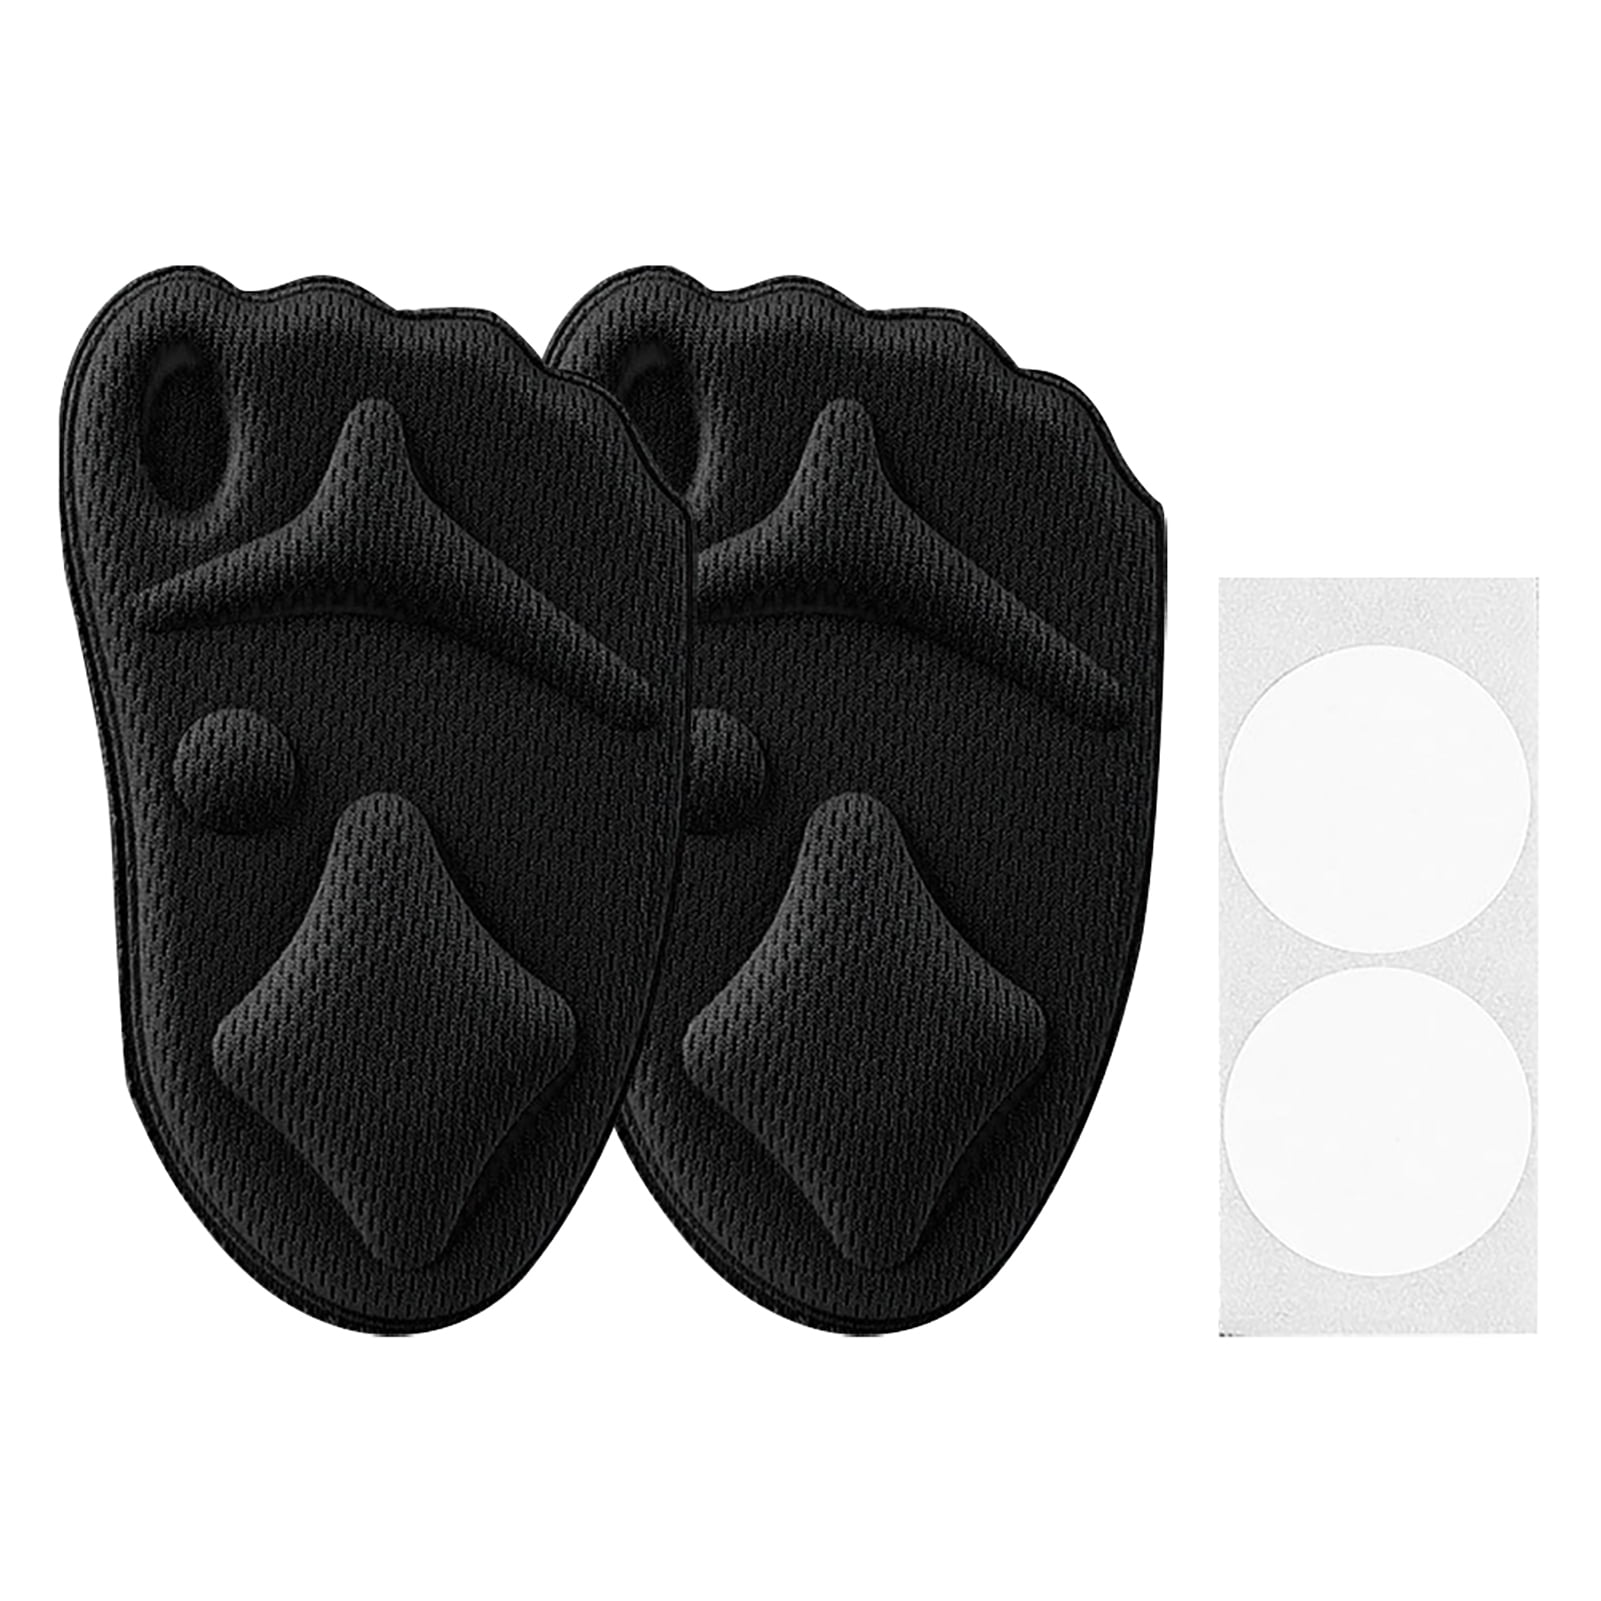 Details about   Sweat Absorbent Insole Sweat Absorbent Insole Comfortable Anti Slippery Full Pad 